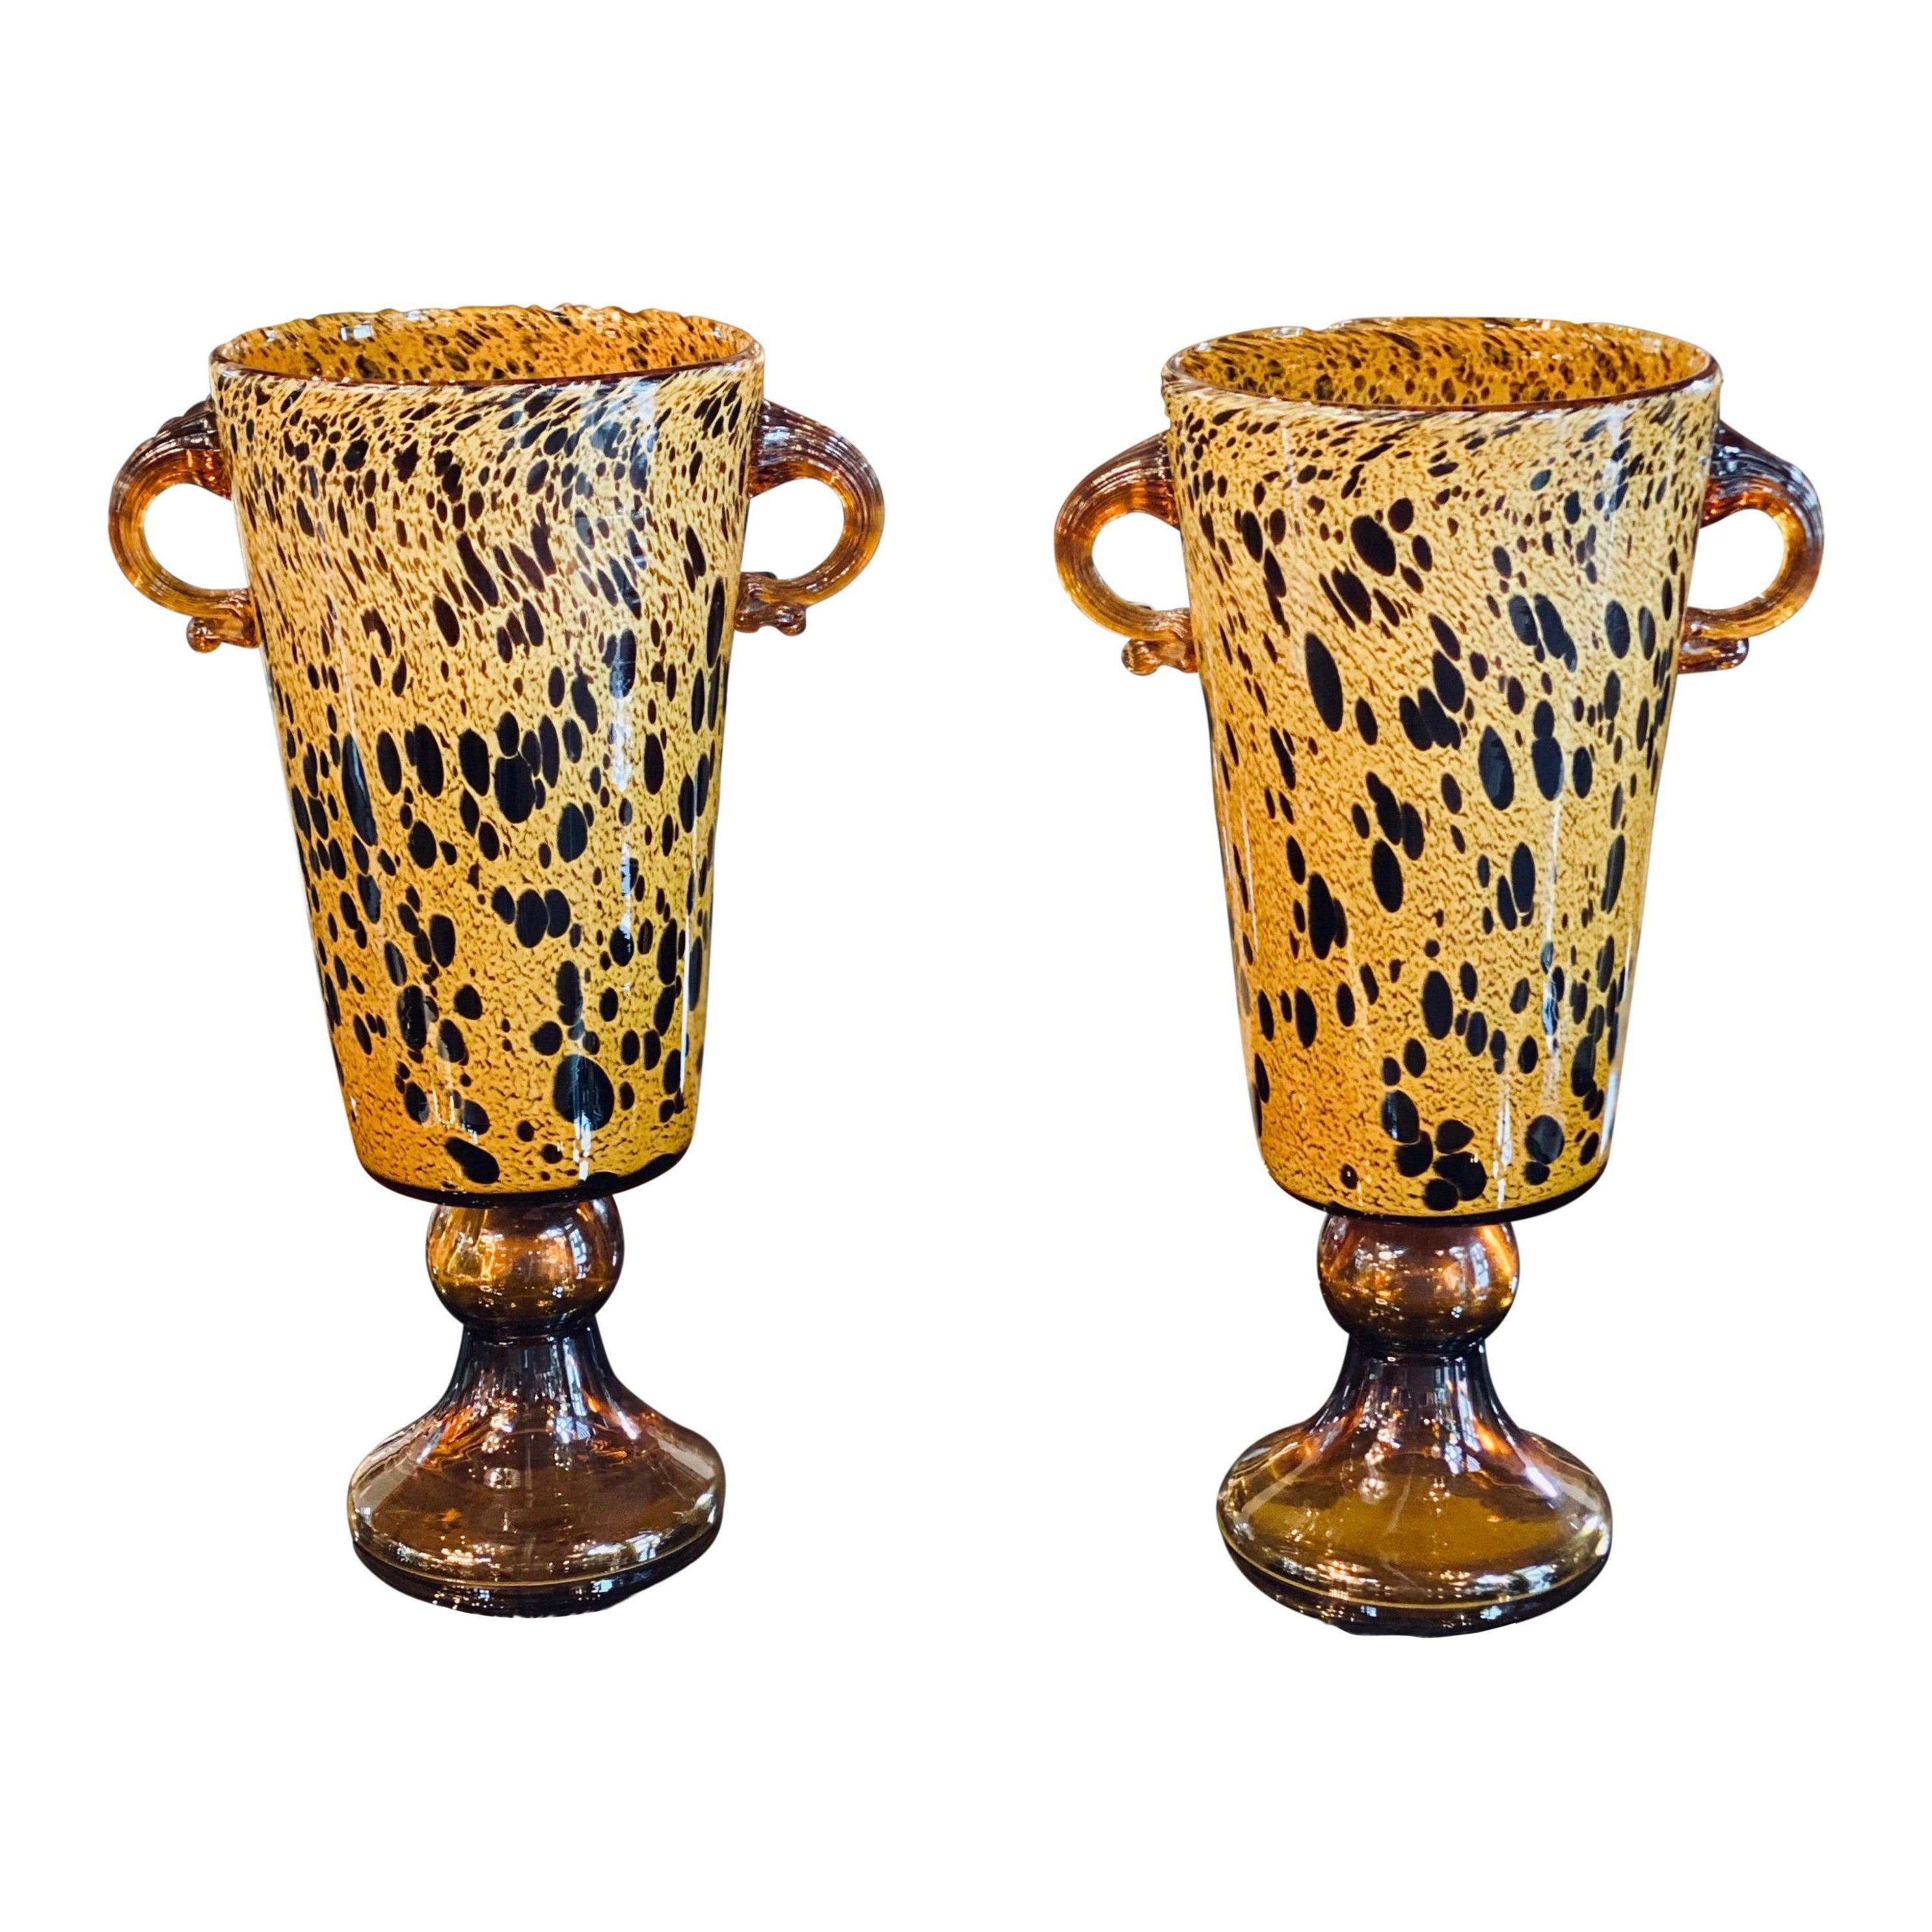 Murano Pair of Spotted Amber Vases with Hoop Handles